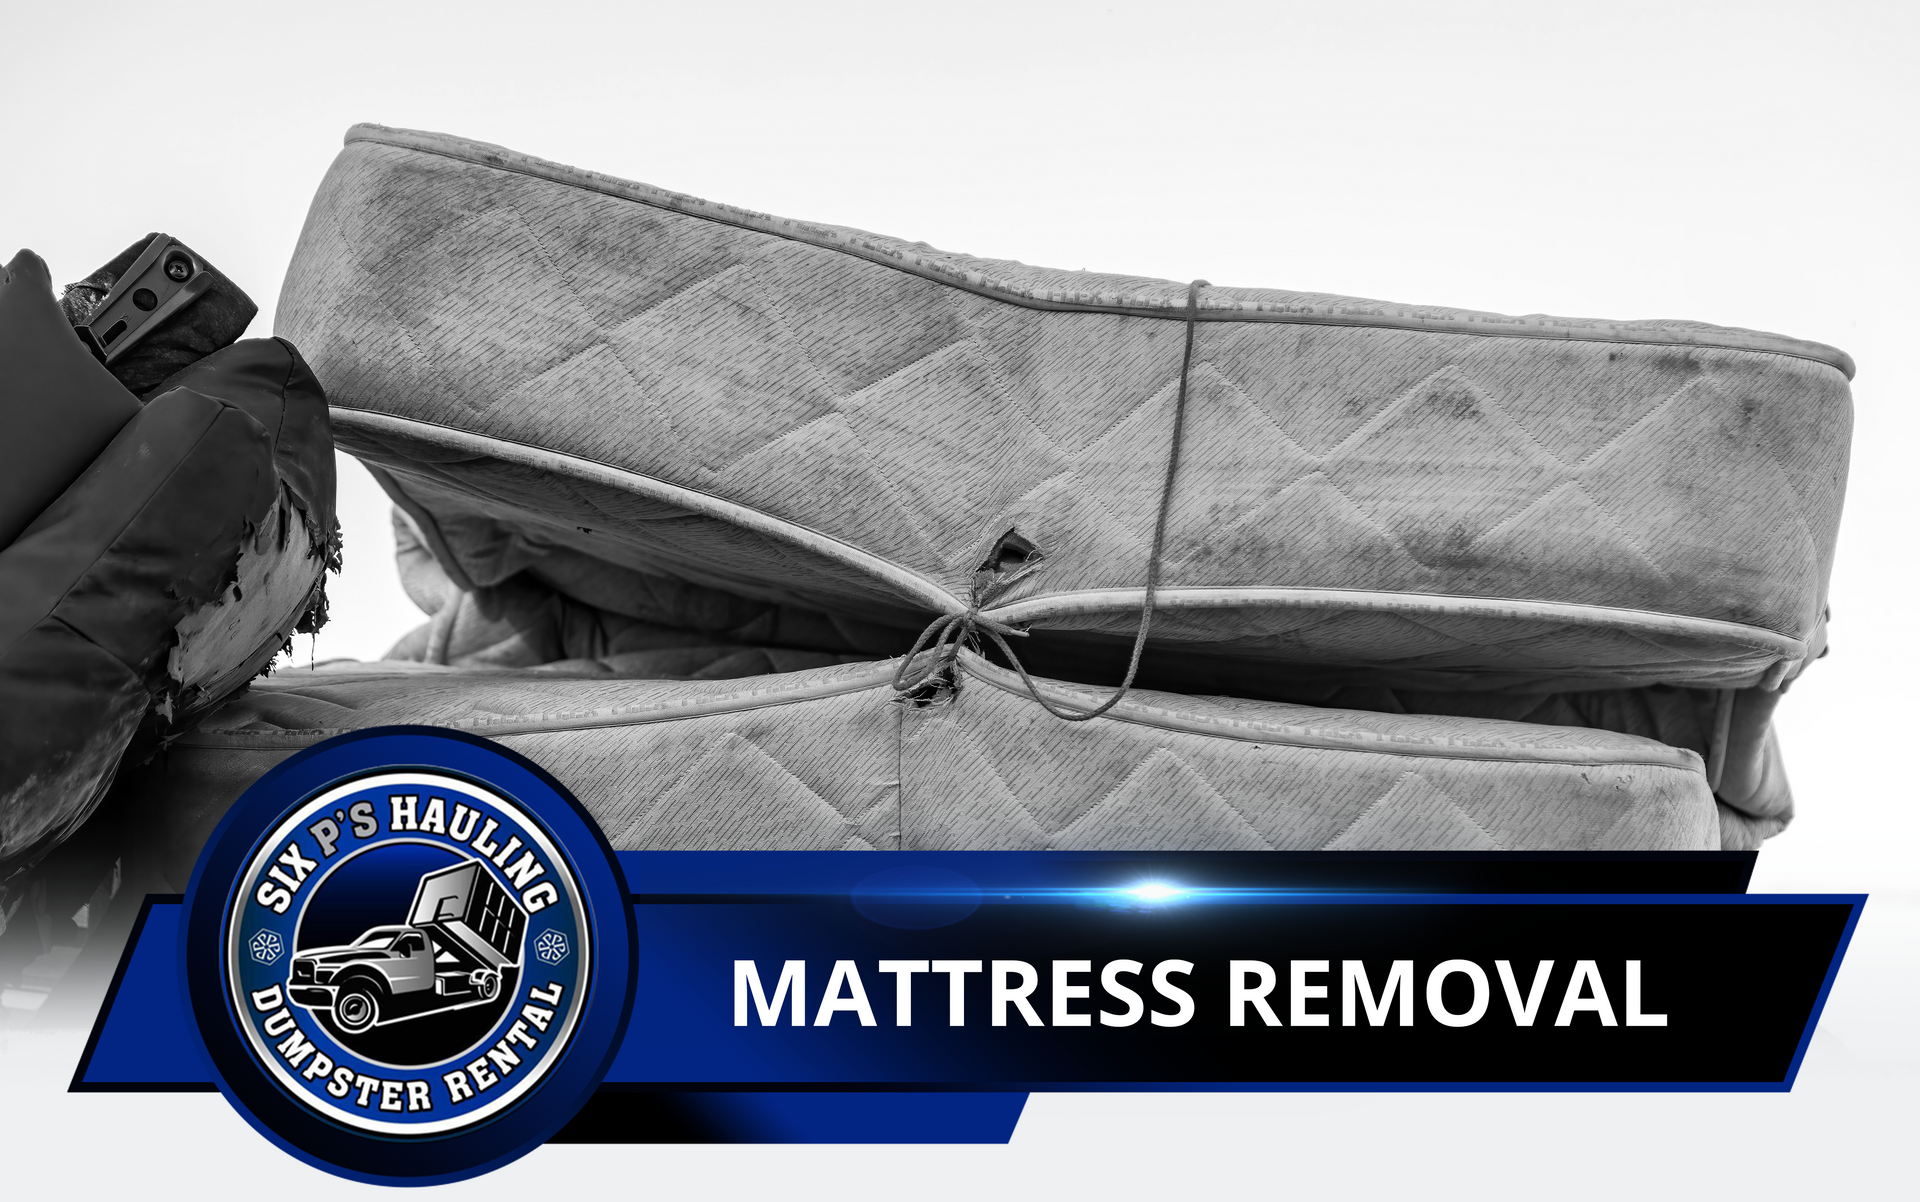 Mattress Removal in Claremont, CA